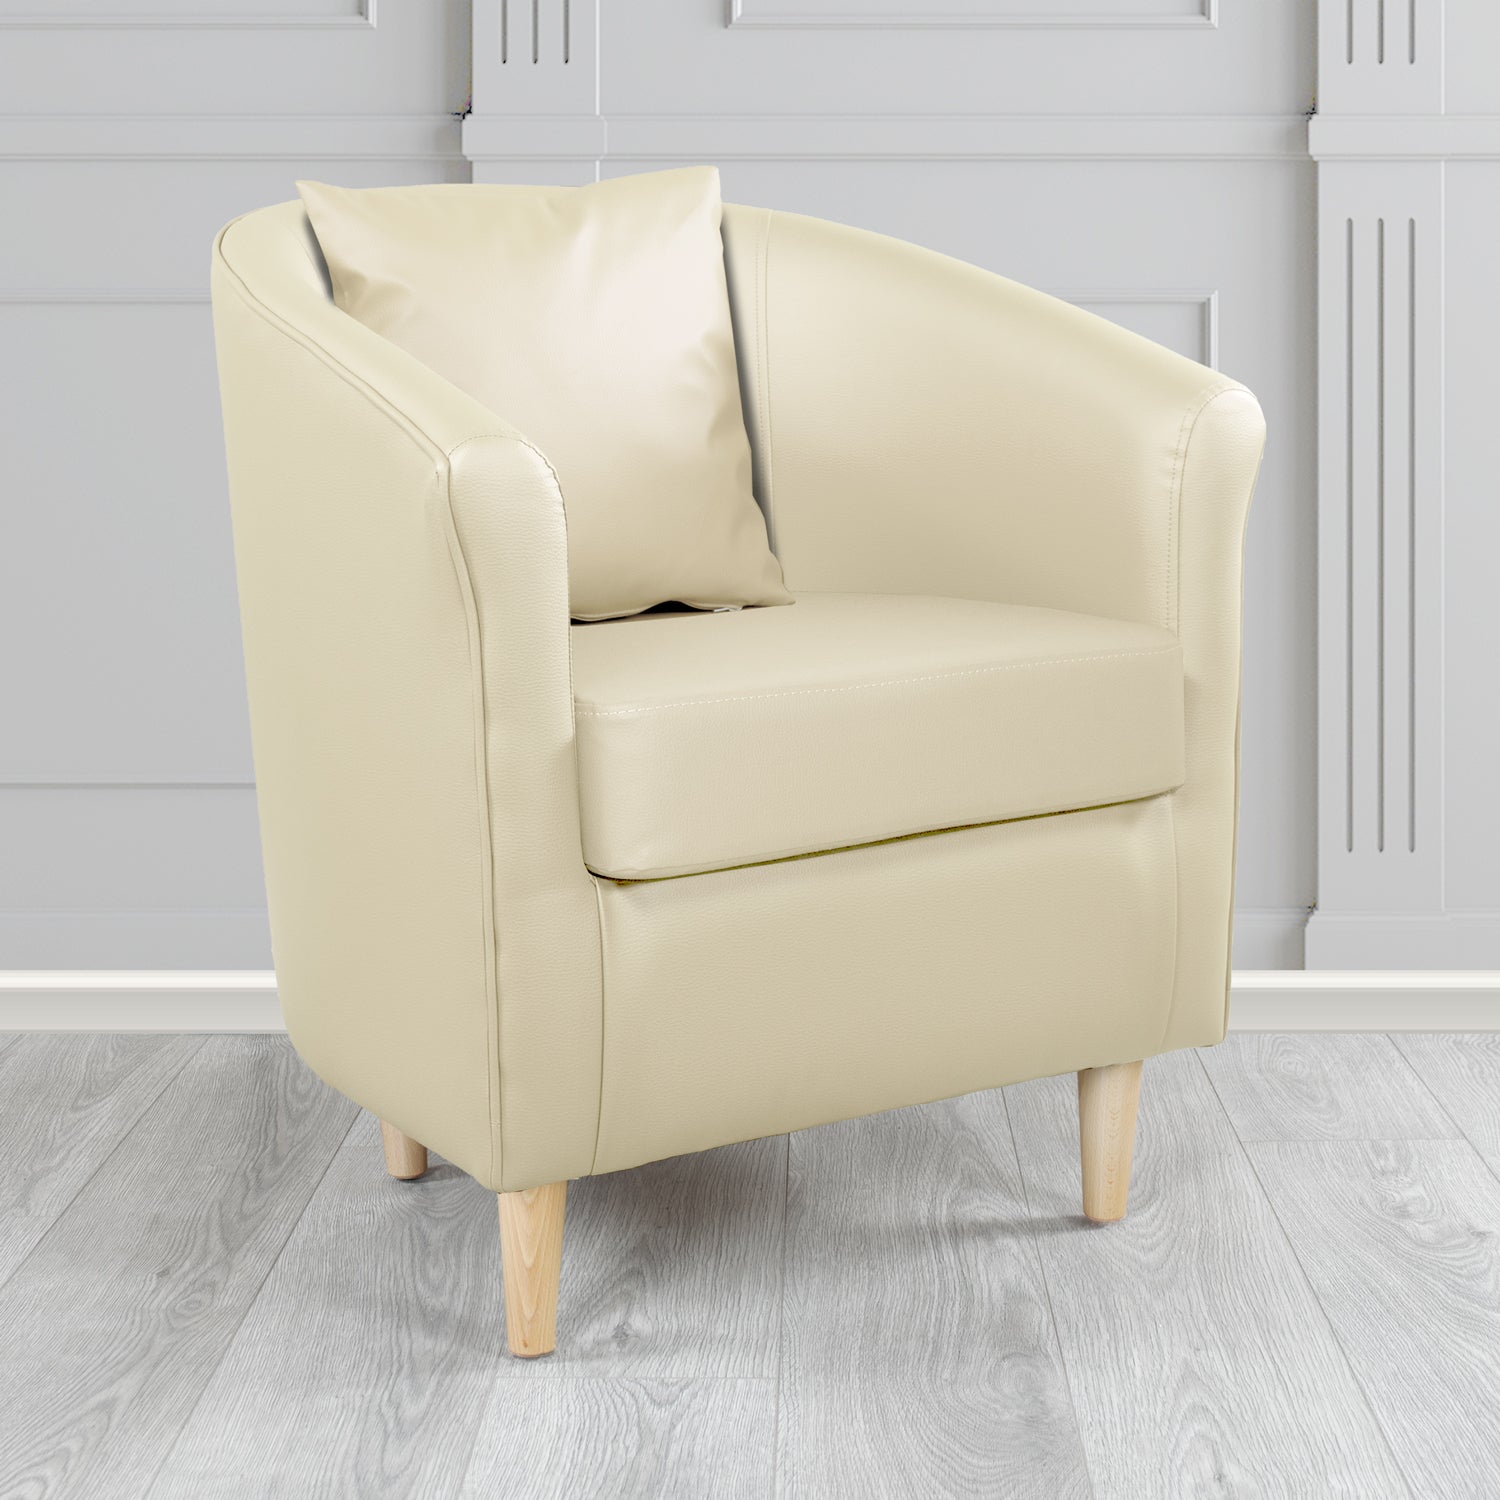 St Tropez Tub Chair with Scatter Cushion in Madrid Cream Faux Leather - The Tub Chair Shop